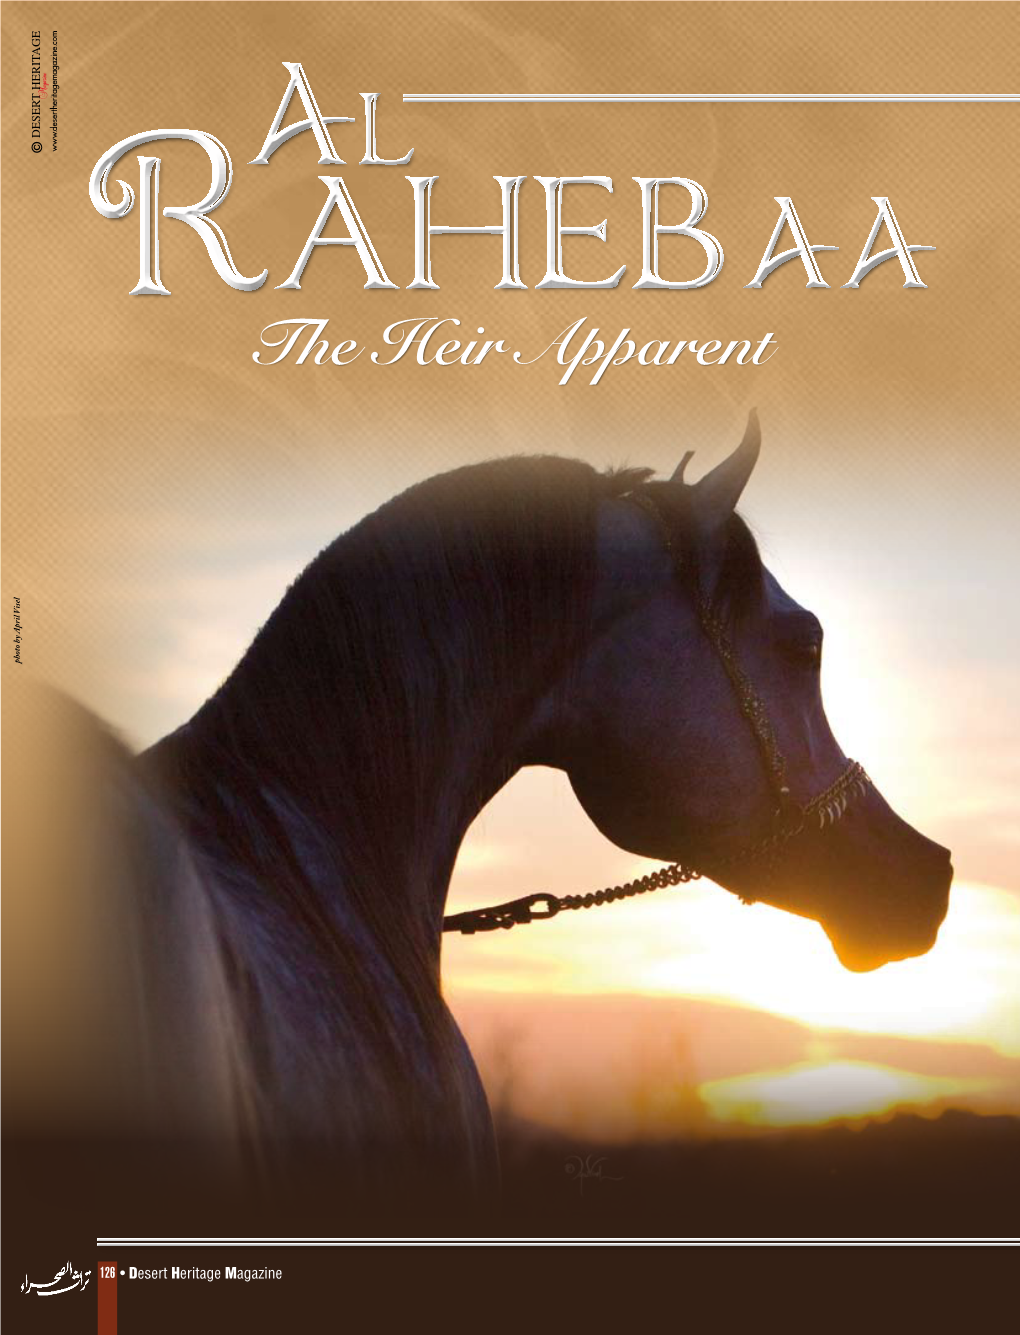 Al Raheb AA (Laheeb X the Vision HG) Is Already a Star, and His Star Is Definitely on the Rise